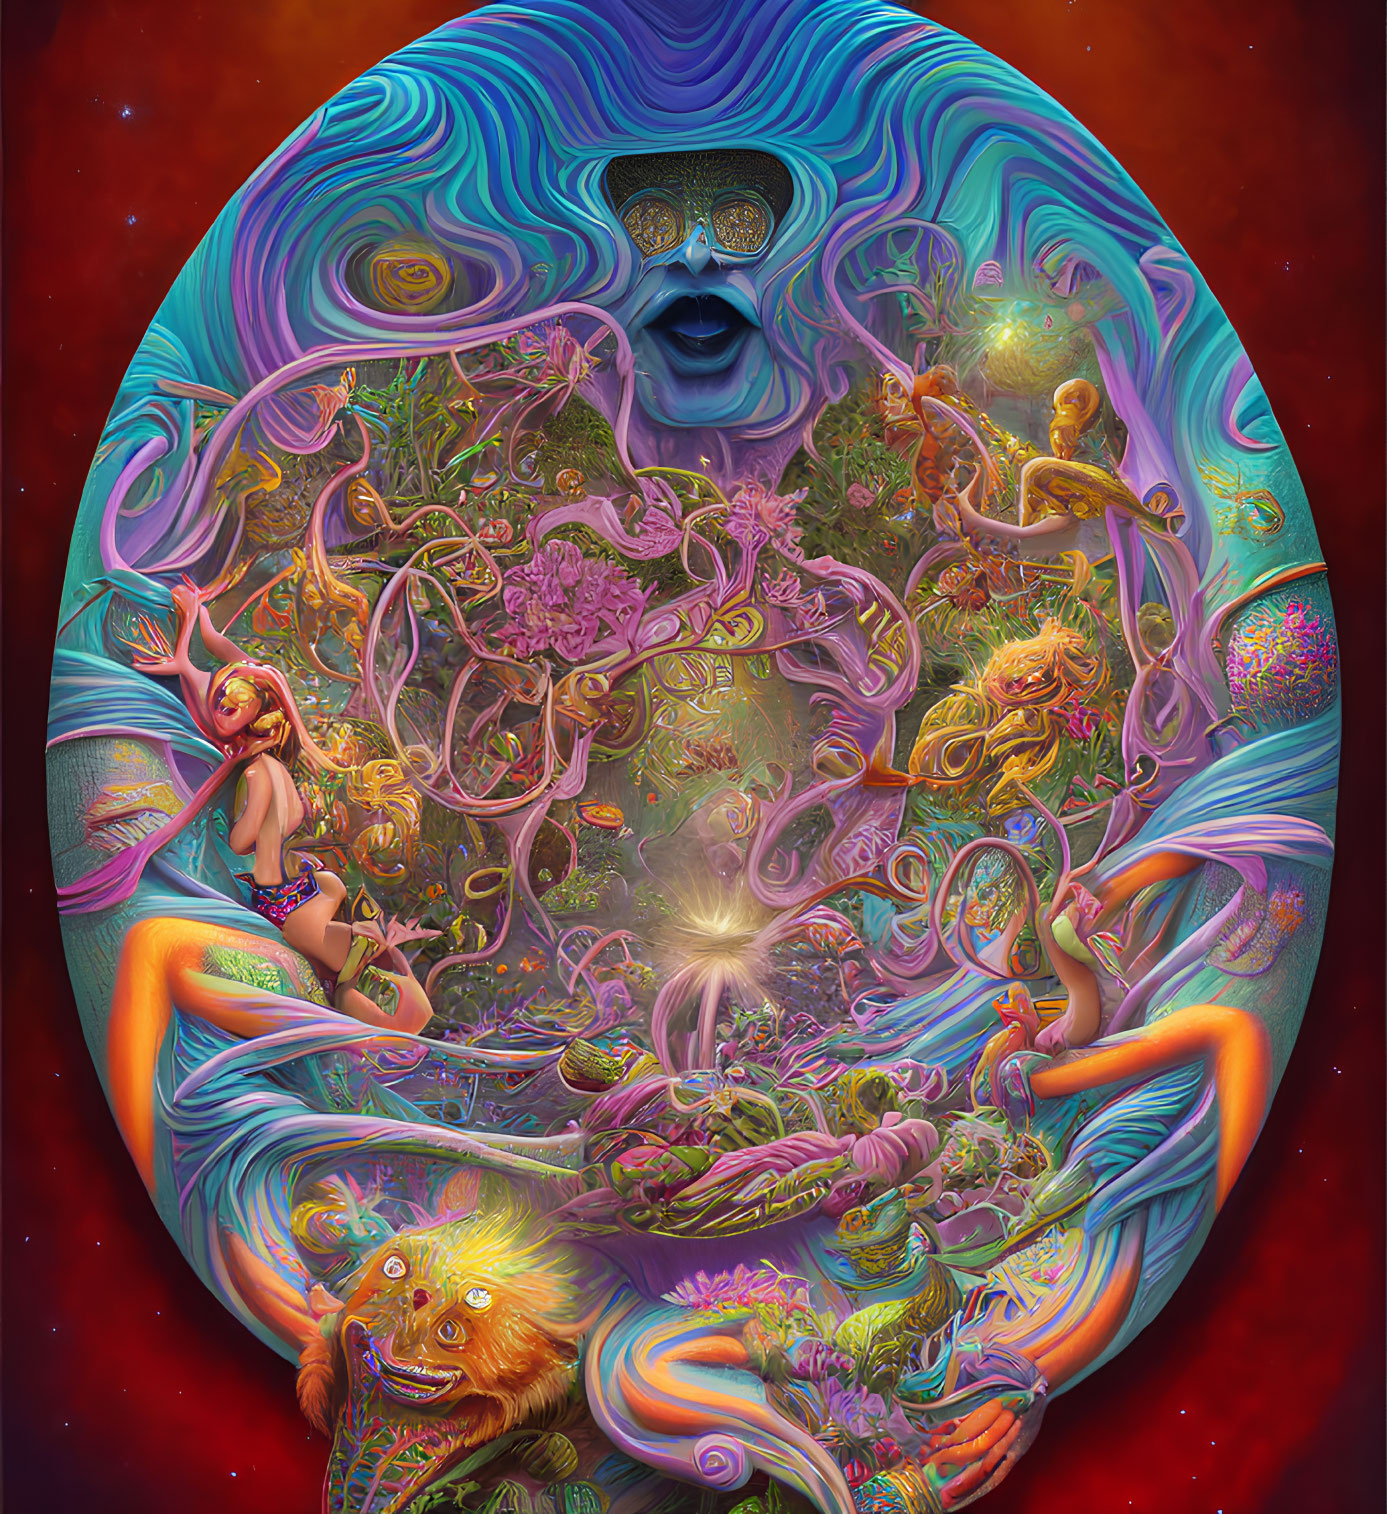 Colorful Psychedelic Artwork with Human-like Face and Sunglasses